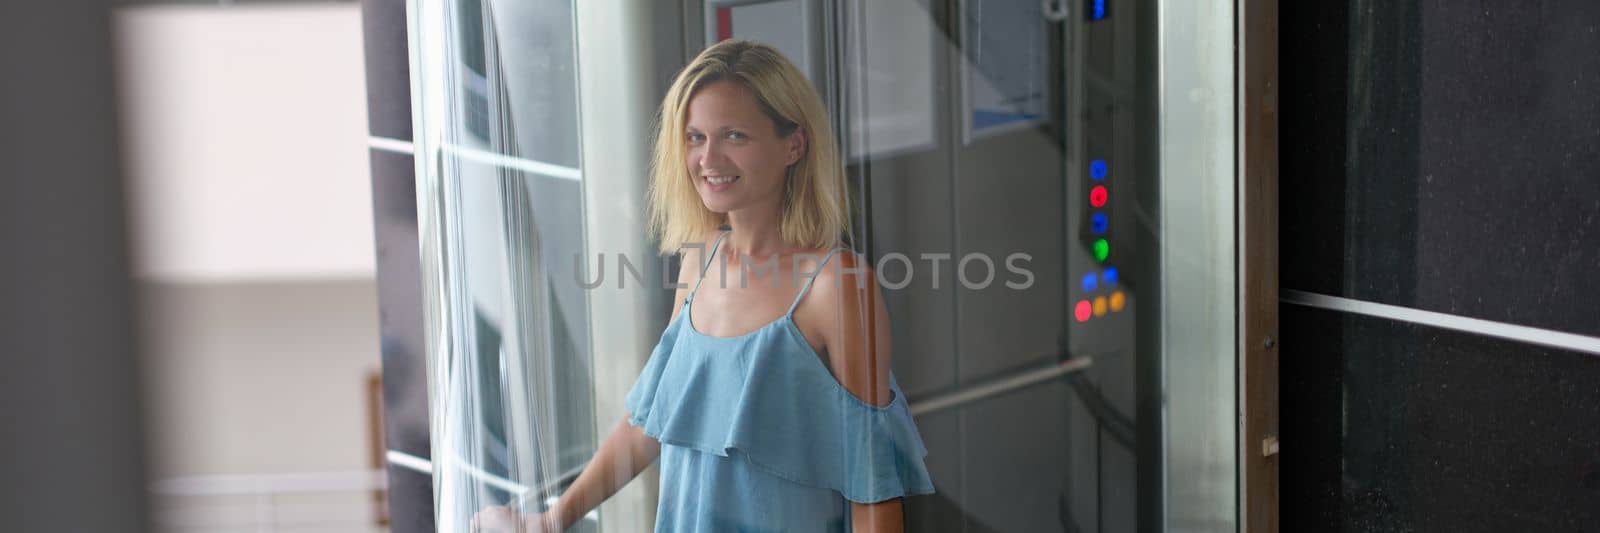 Beautiful smiling woman in transparent glass elevator. Stylish modern elevators in hotels and business centers concept